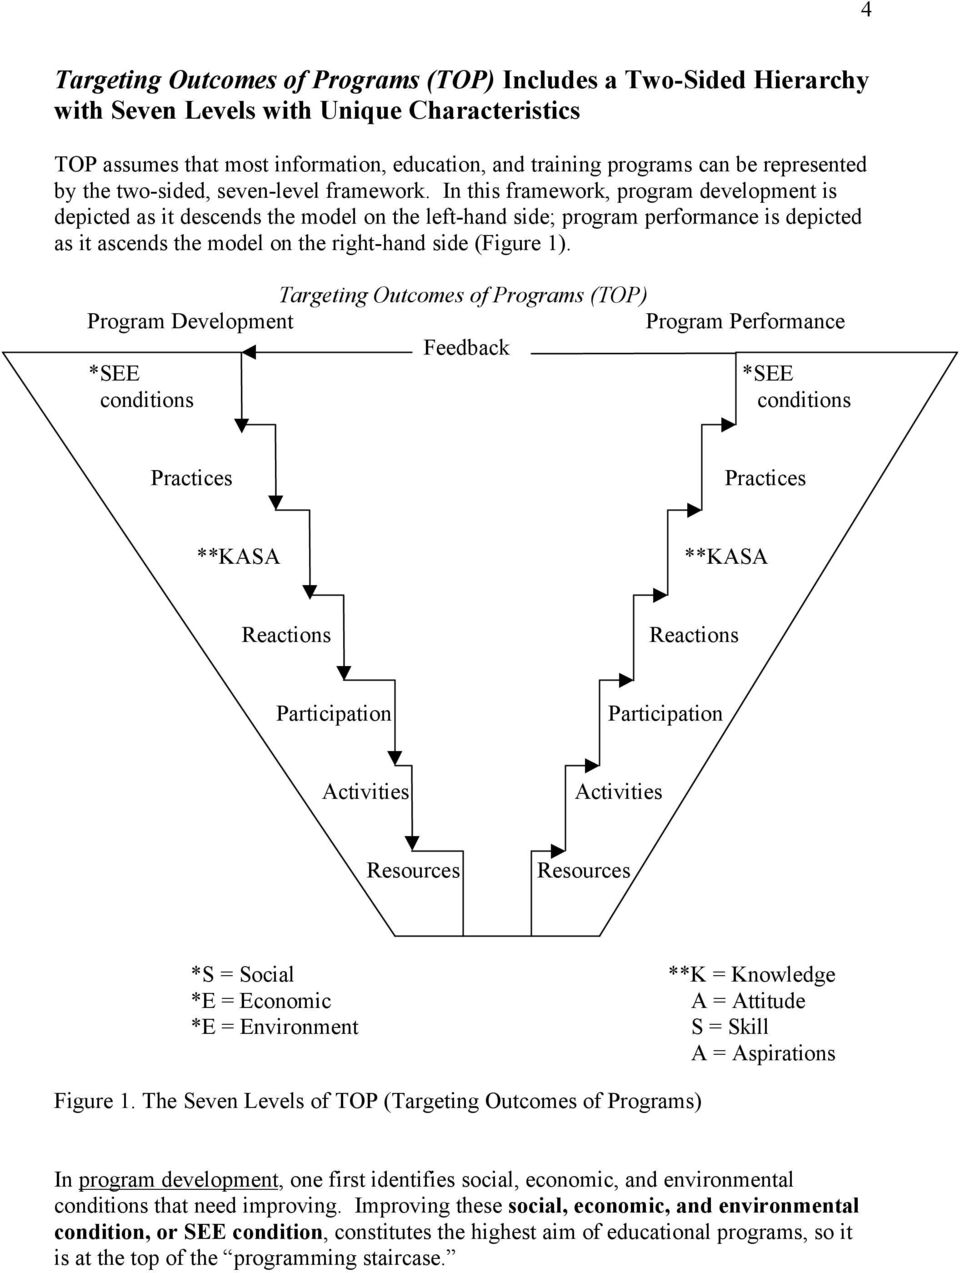 In this framework, program development is depicted as it descends the model on the left-hand side; program performance is depicted as it ascends the model on the right-hand side (Figure 1).